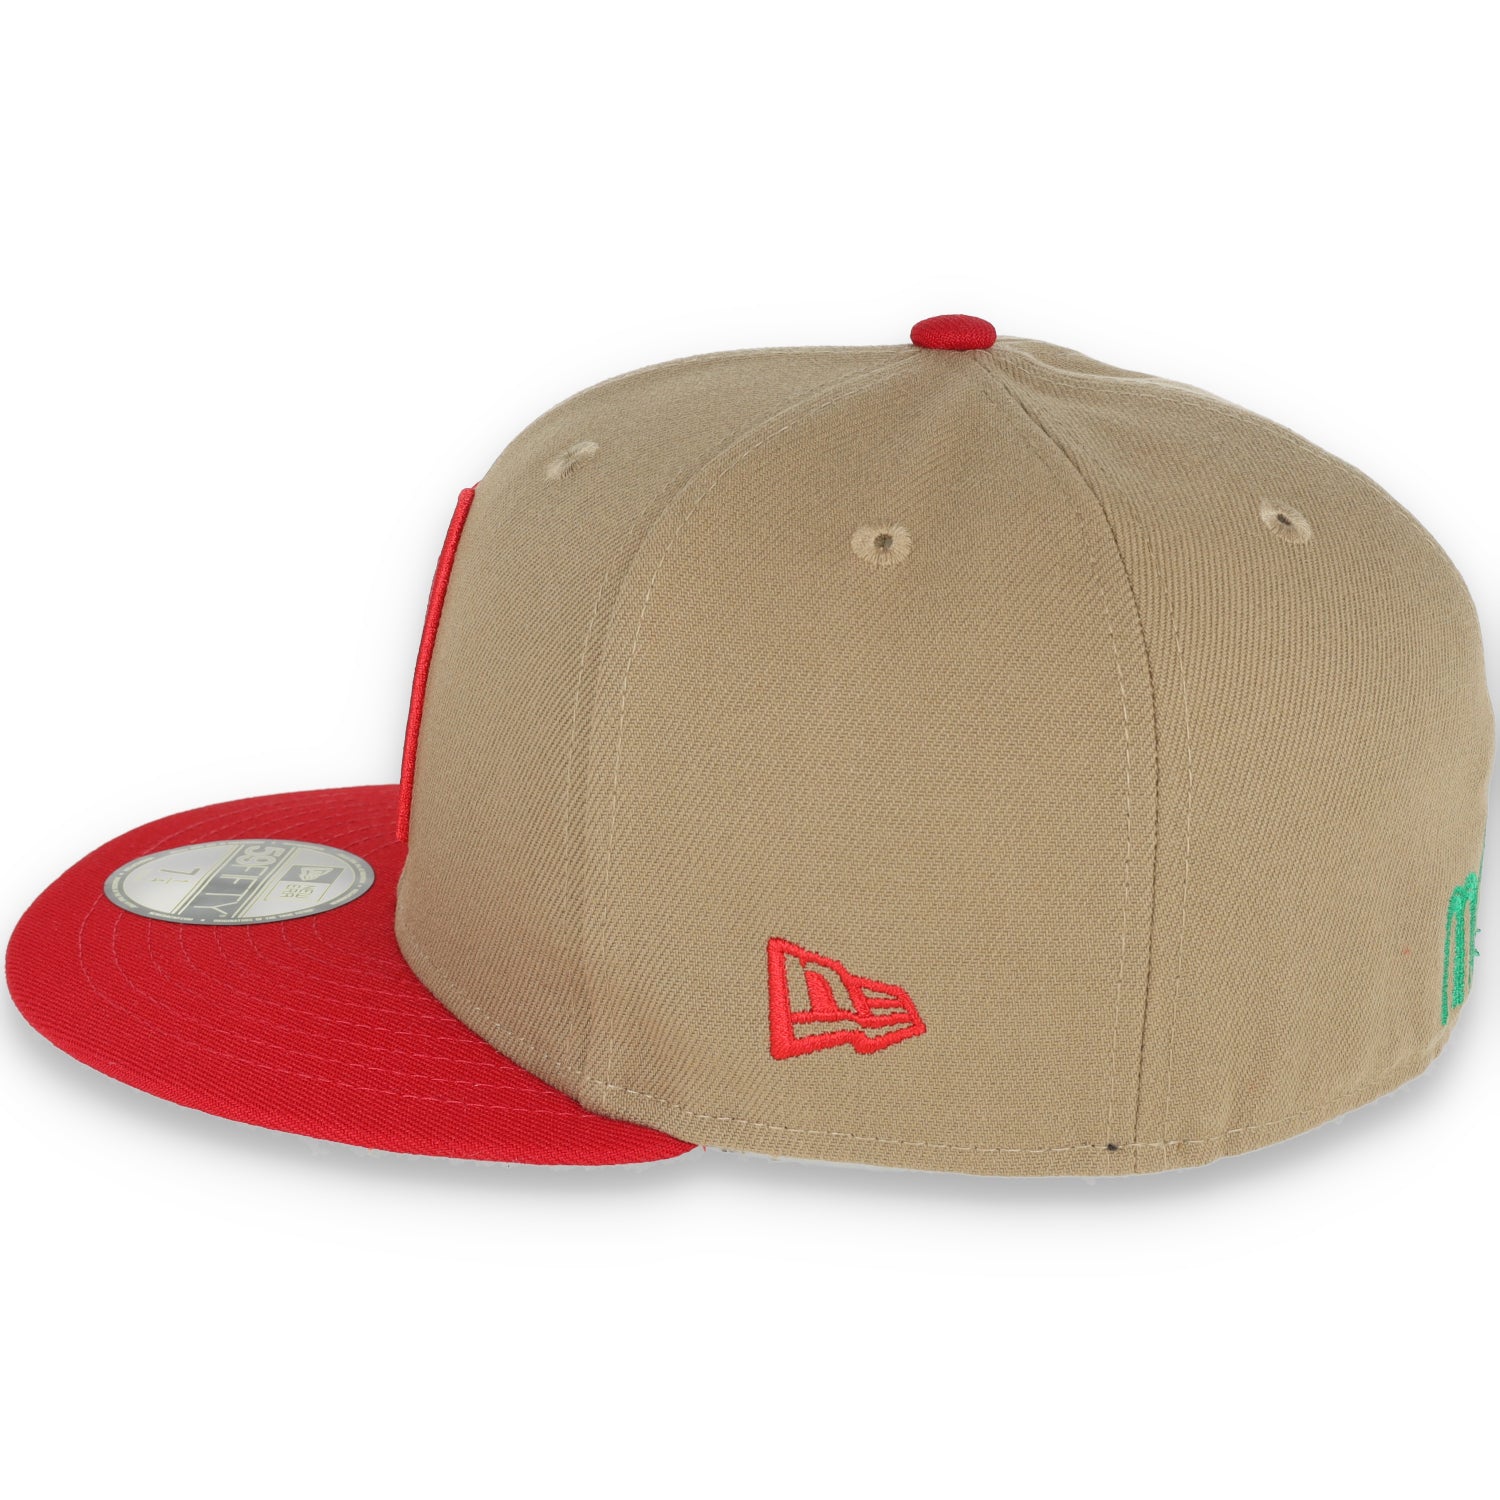 NEW ERA OFFICIAL MEXICO WORDMARK 59FIFTY FITTED HAT-KHAKI/SCARLET